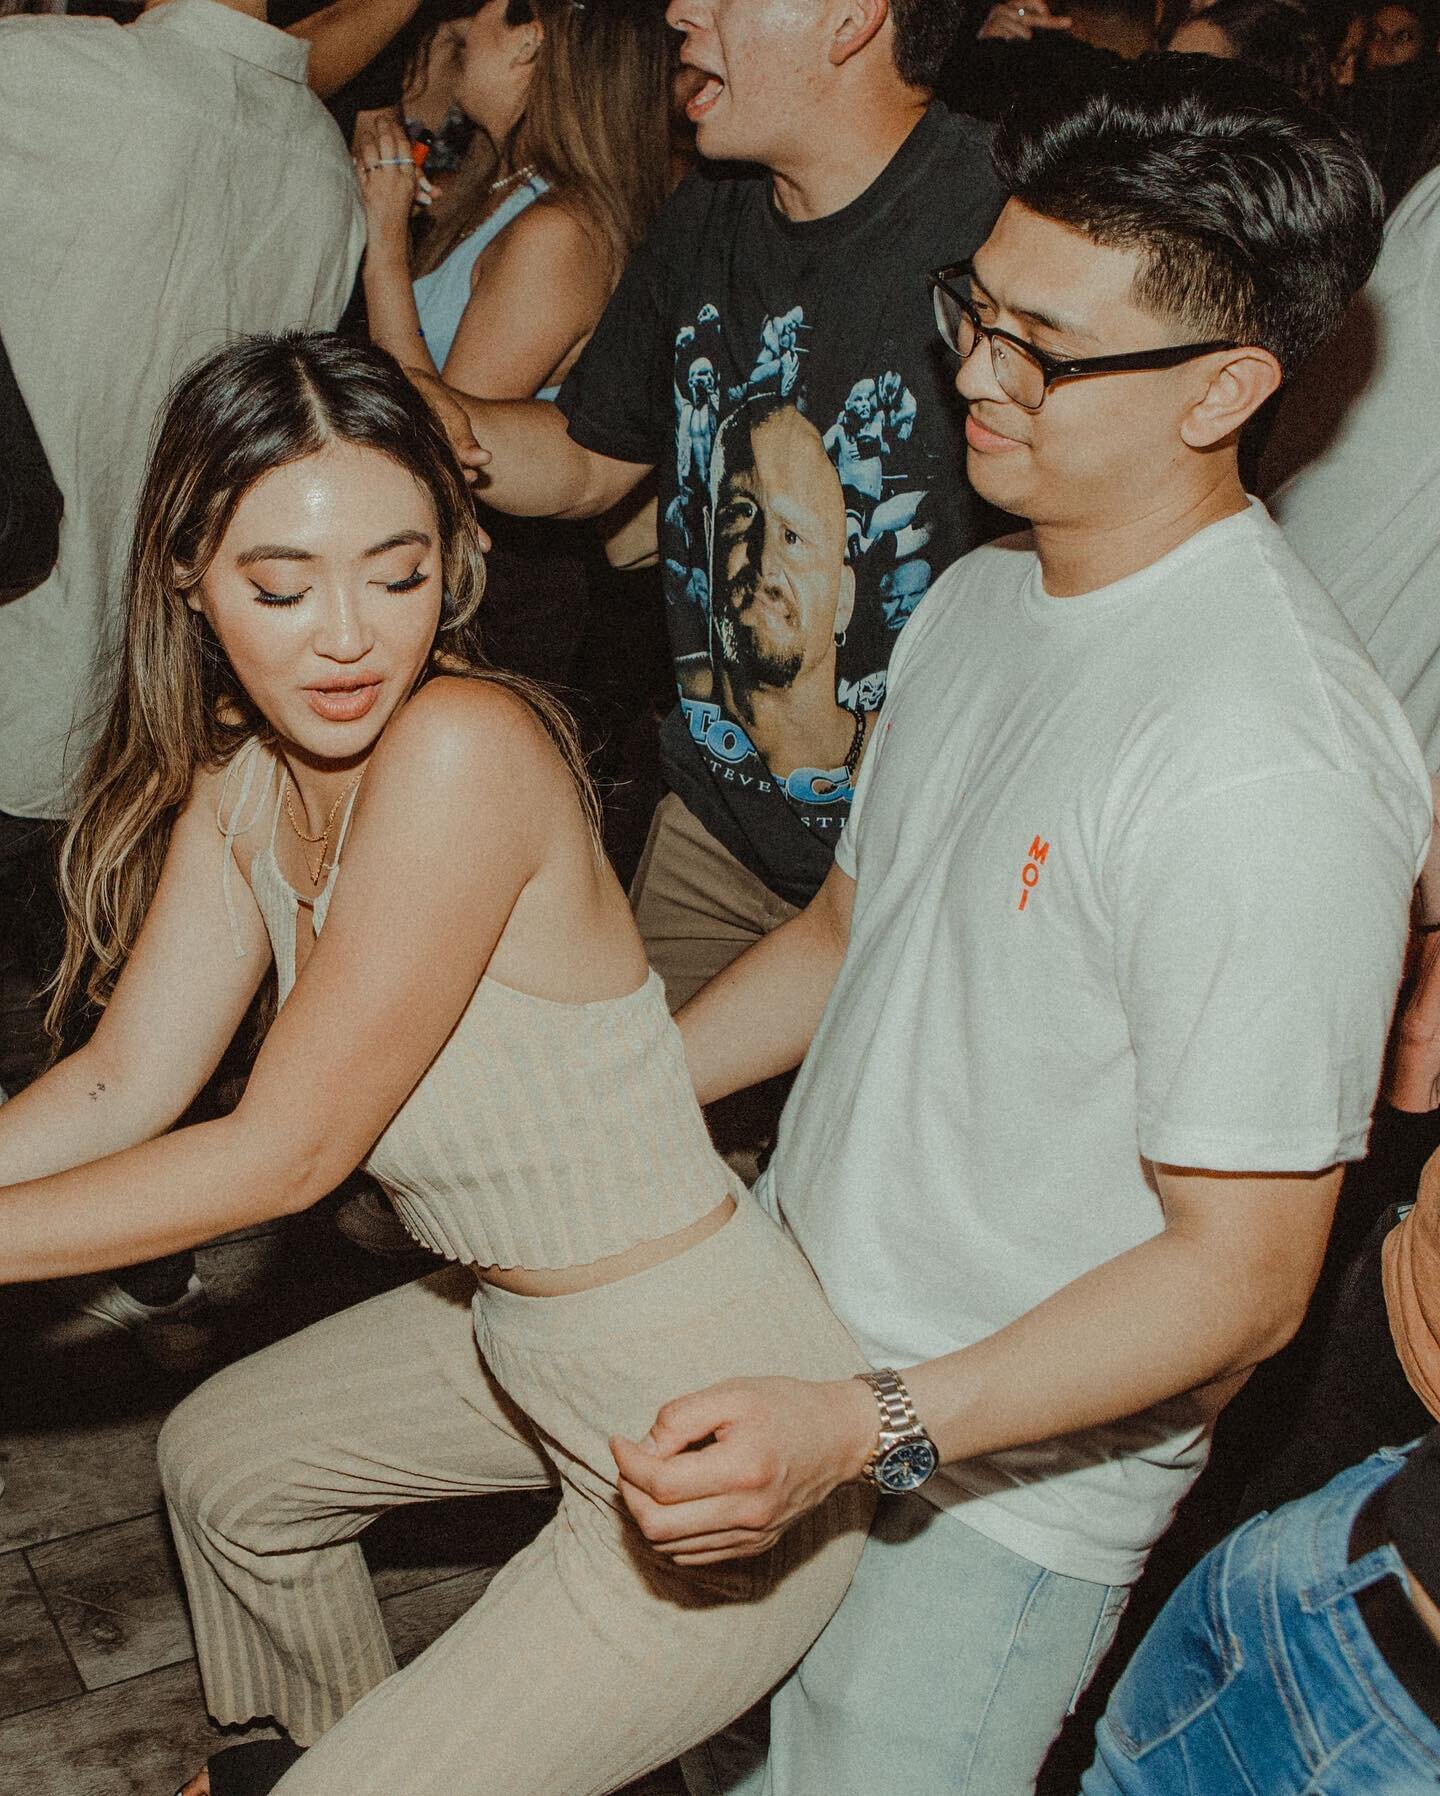 It&rsquo;s SaturYAY and it's poppin' like champagne! 🍾⁣
⁣
☀️ Suns out and it&rsquo;s makin&rsquo; us feel good good. Slide through and vibe with @zomanno and @acefunk_ tonight! 
⁣⁣⁣⁣⁣
📸: @35mmallie and @marilynnguyen⁣⁣⁣⁣⁣
⁣⁣⁣⁣⁣⁣⁣
Celebrating?! Don&